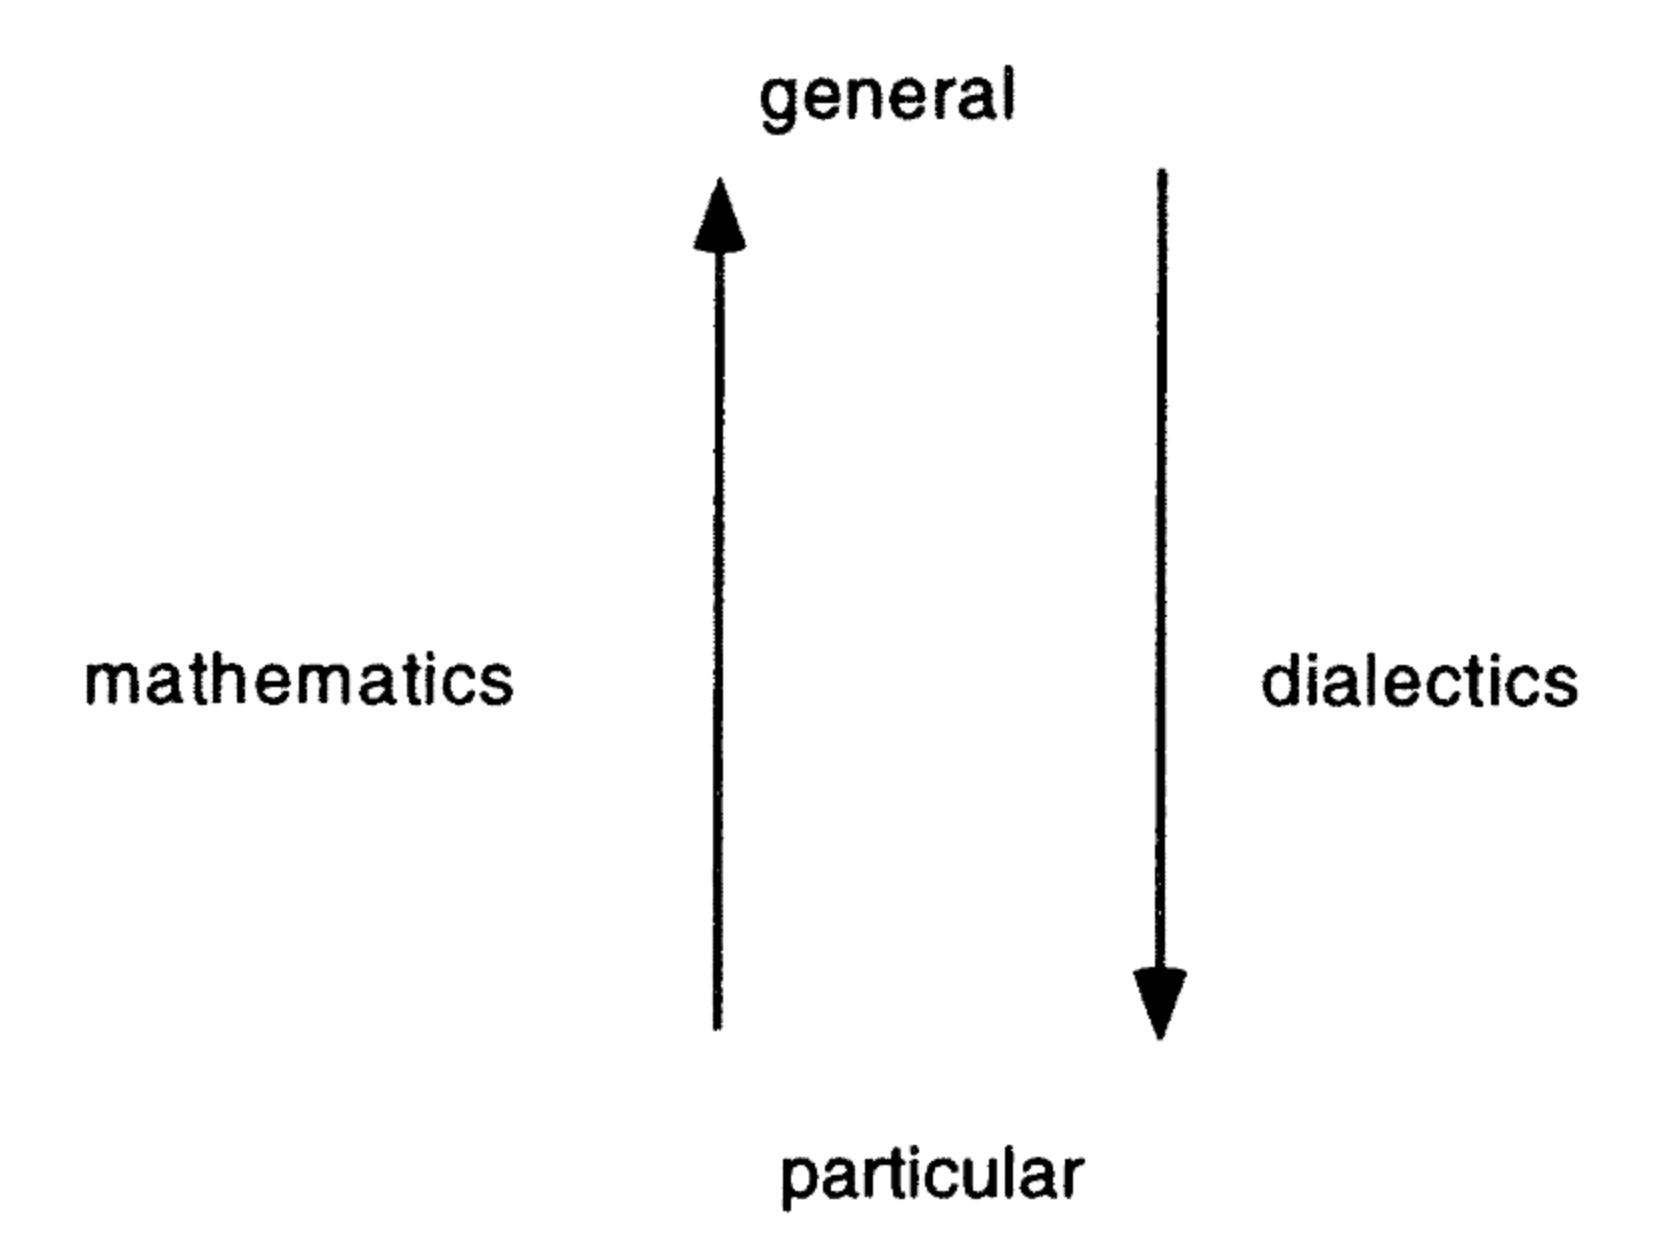 Image showing how mathematics takes the particular to the general and dialectics takes the general to the particular